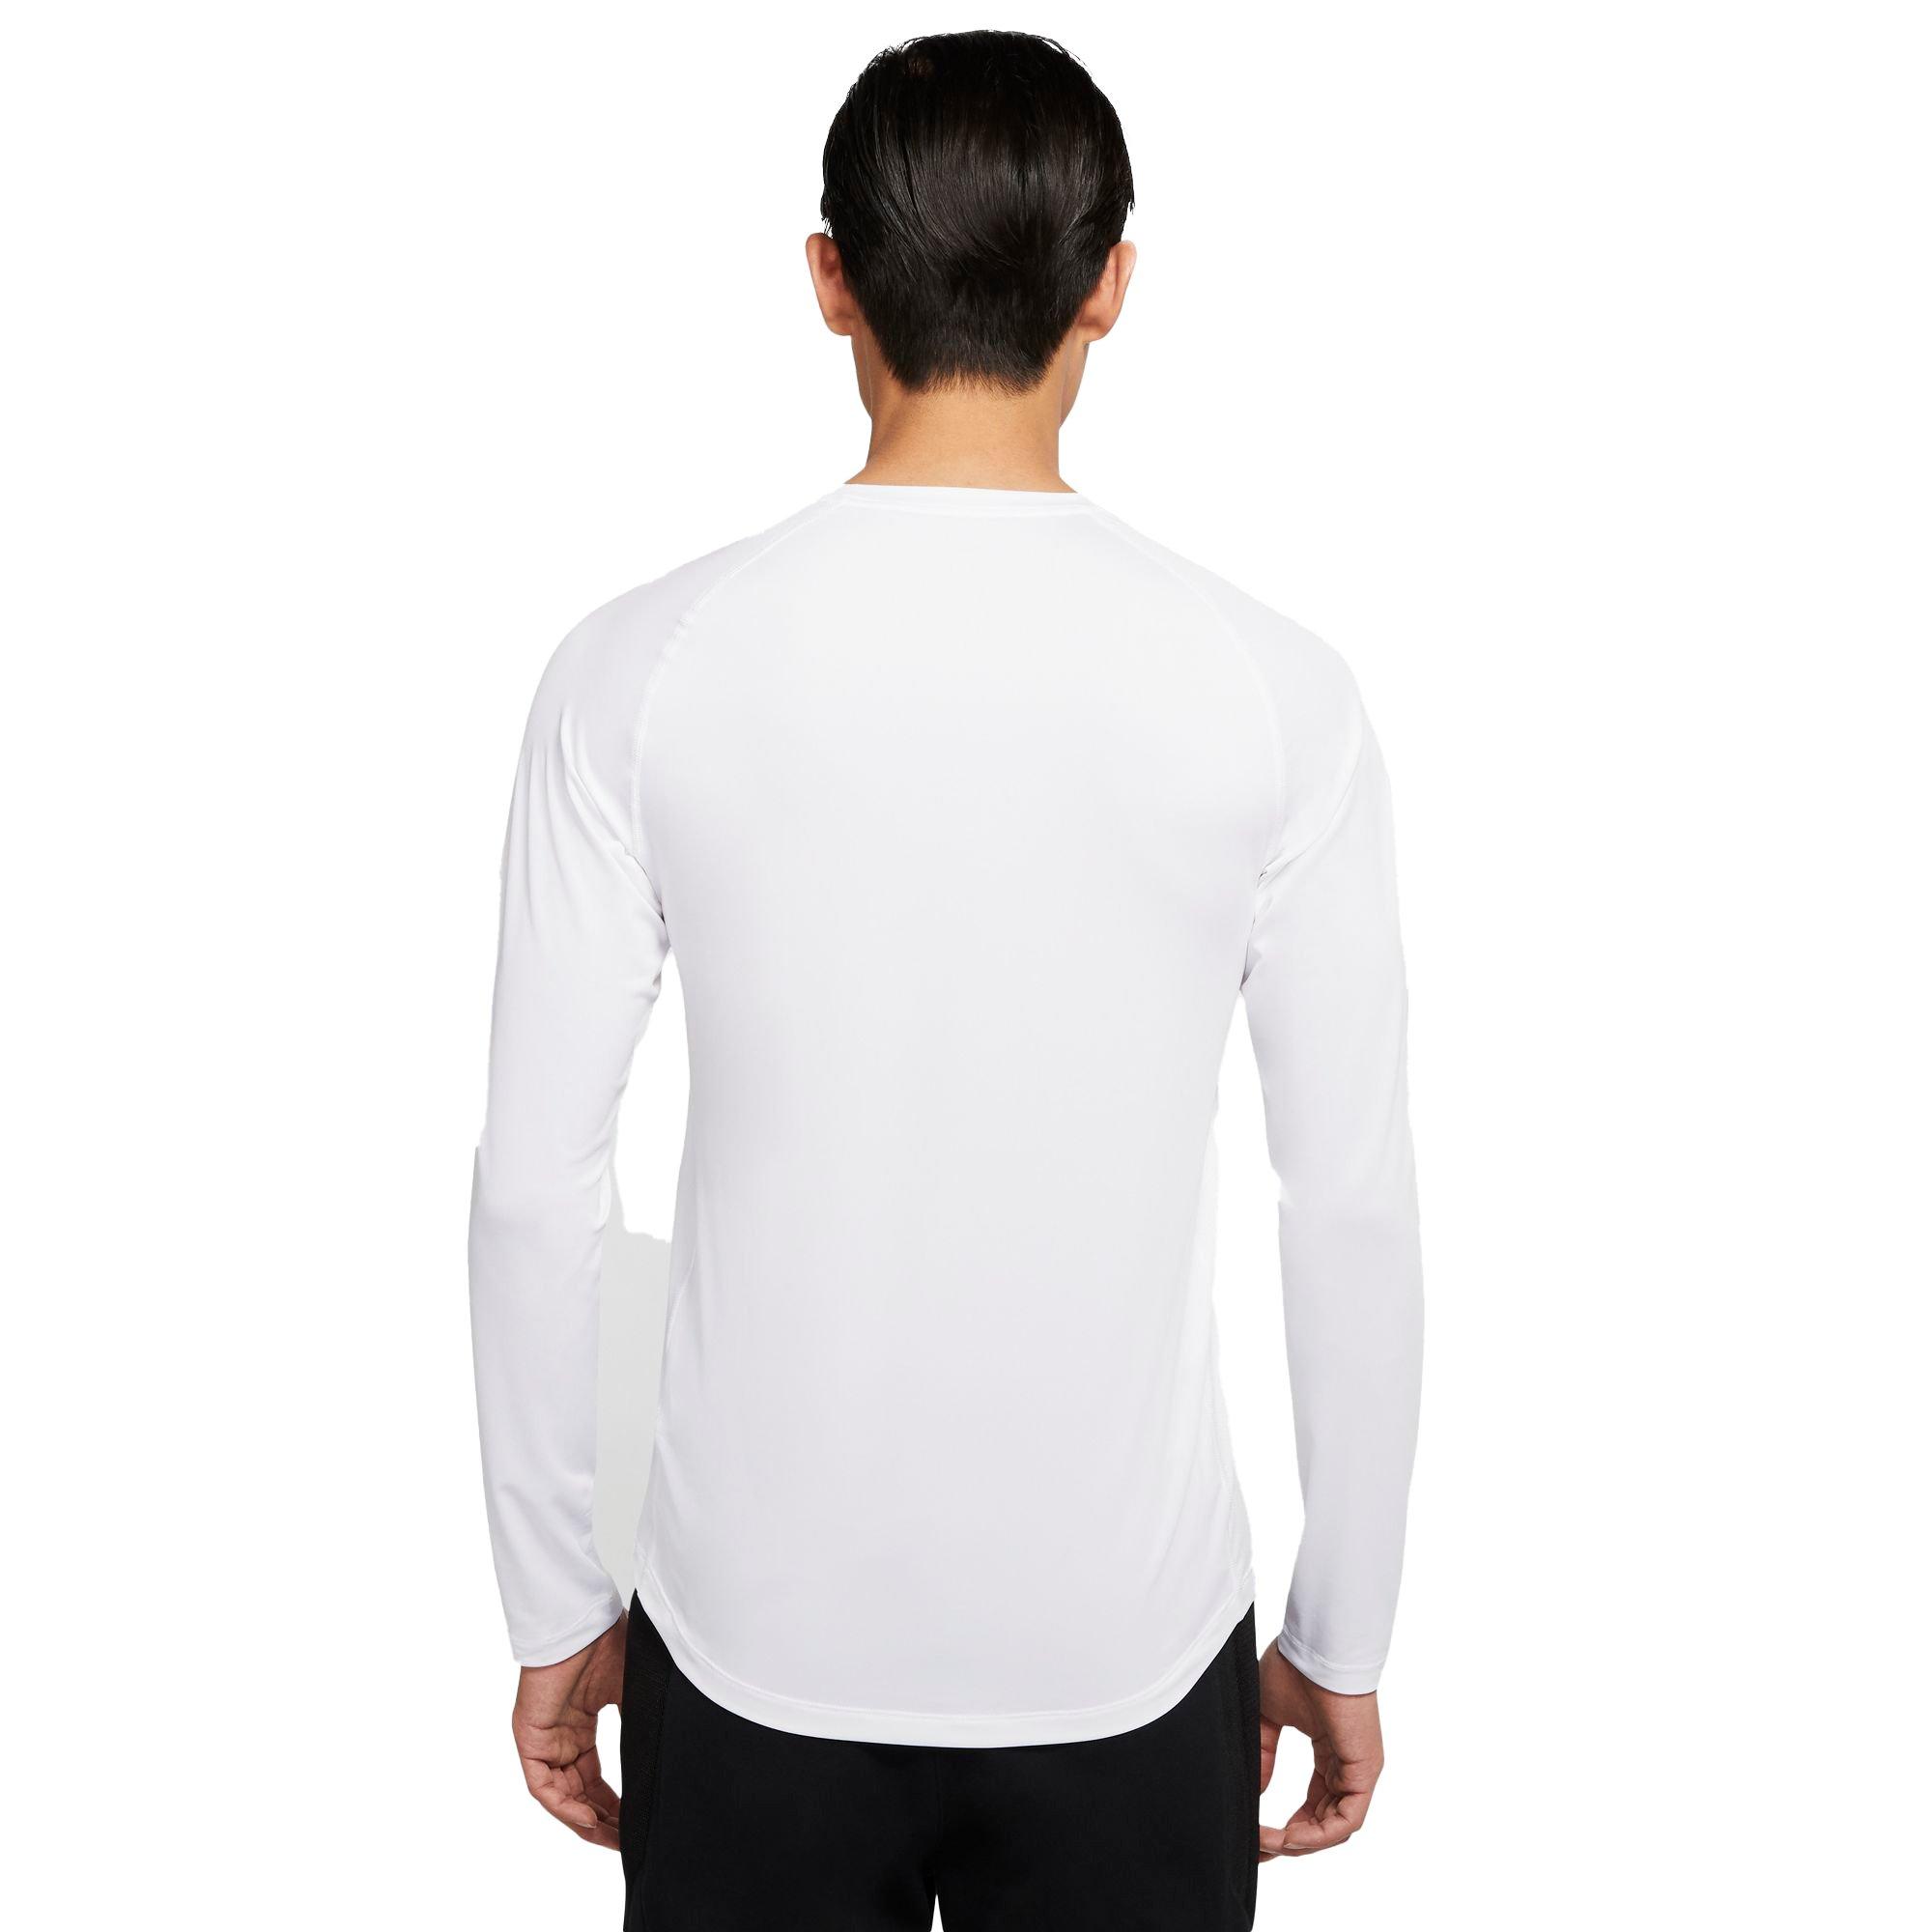 Nike Men's Pro Fitted Long Sleeve Top - White